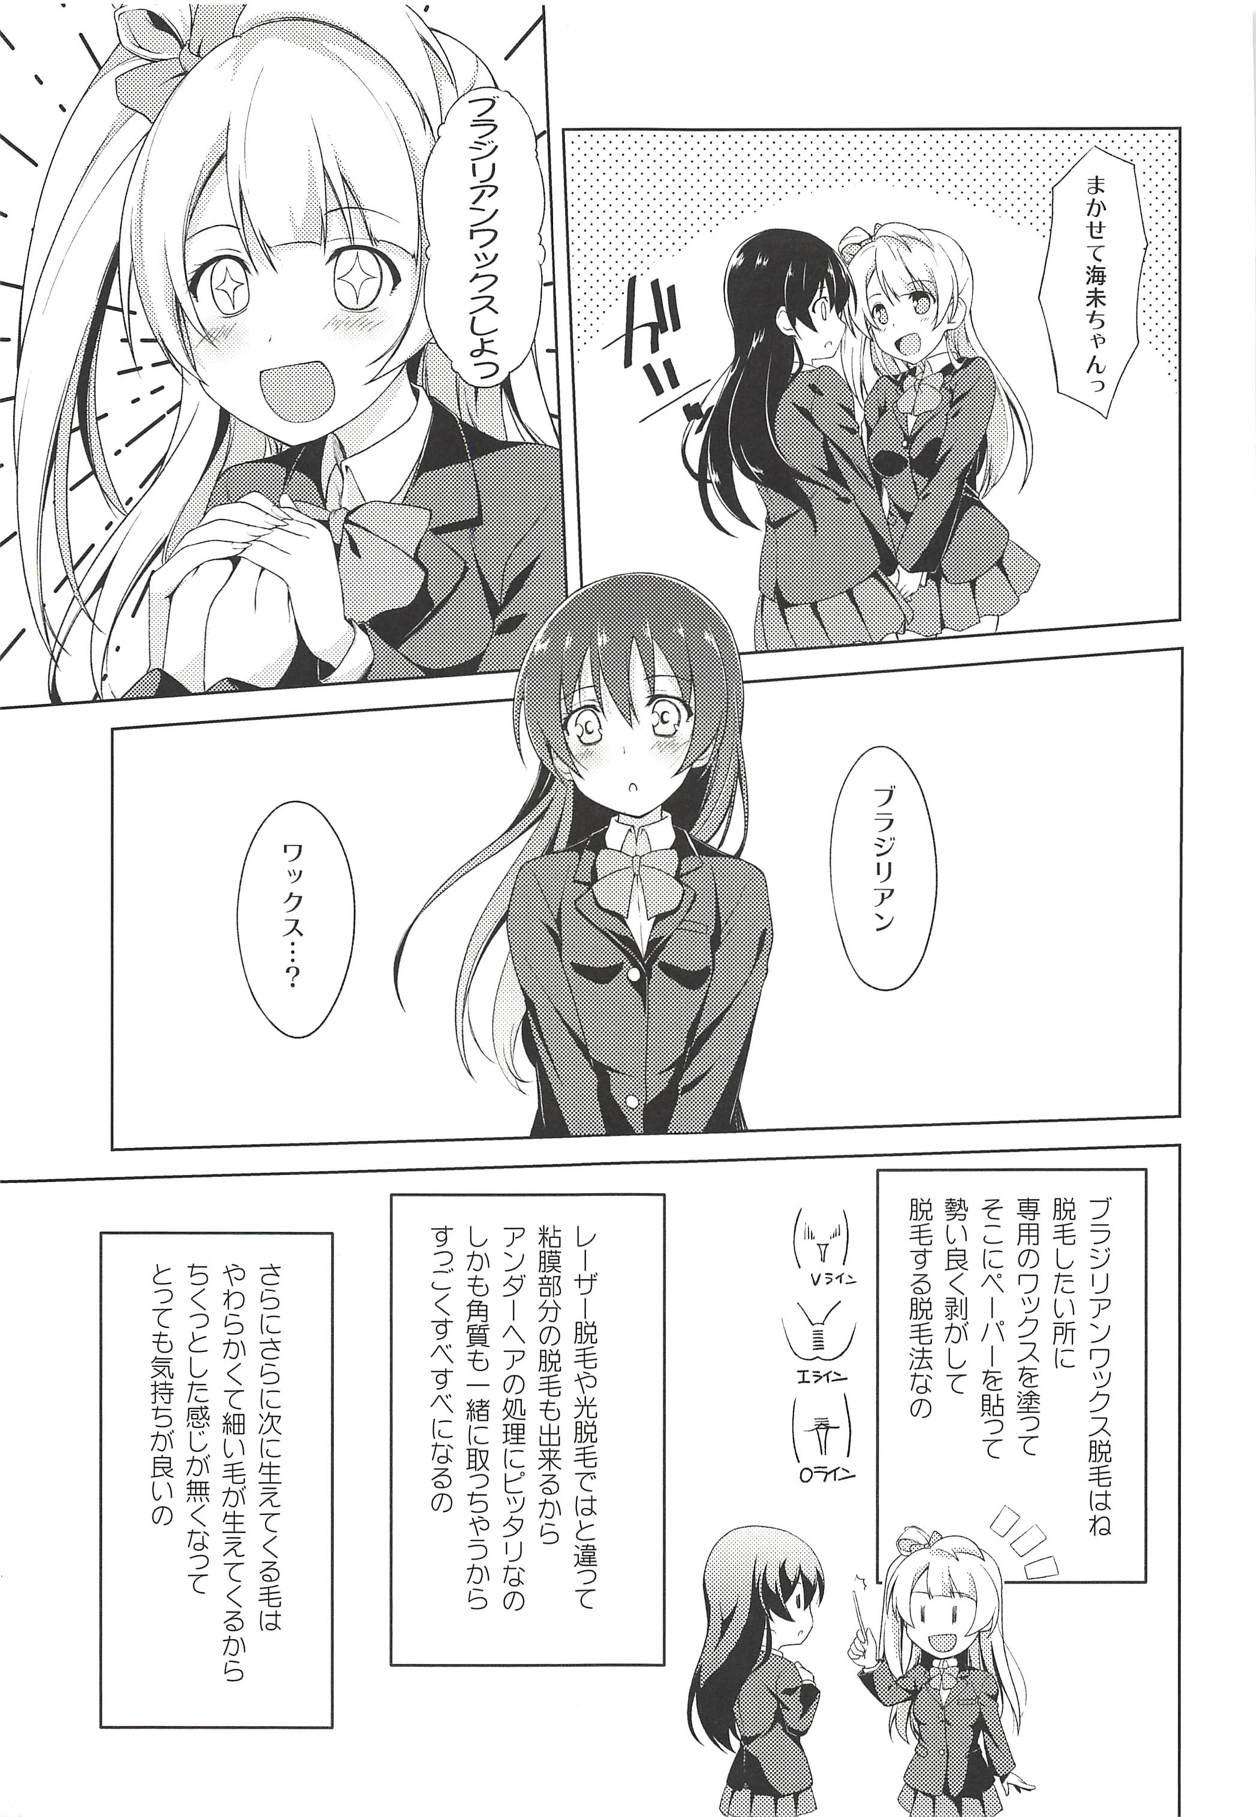 Leche Marshmallow Mischief - Love live Audition - Page 3